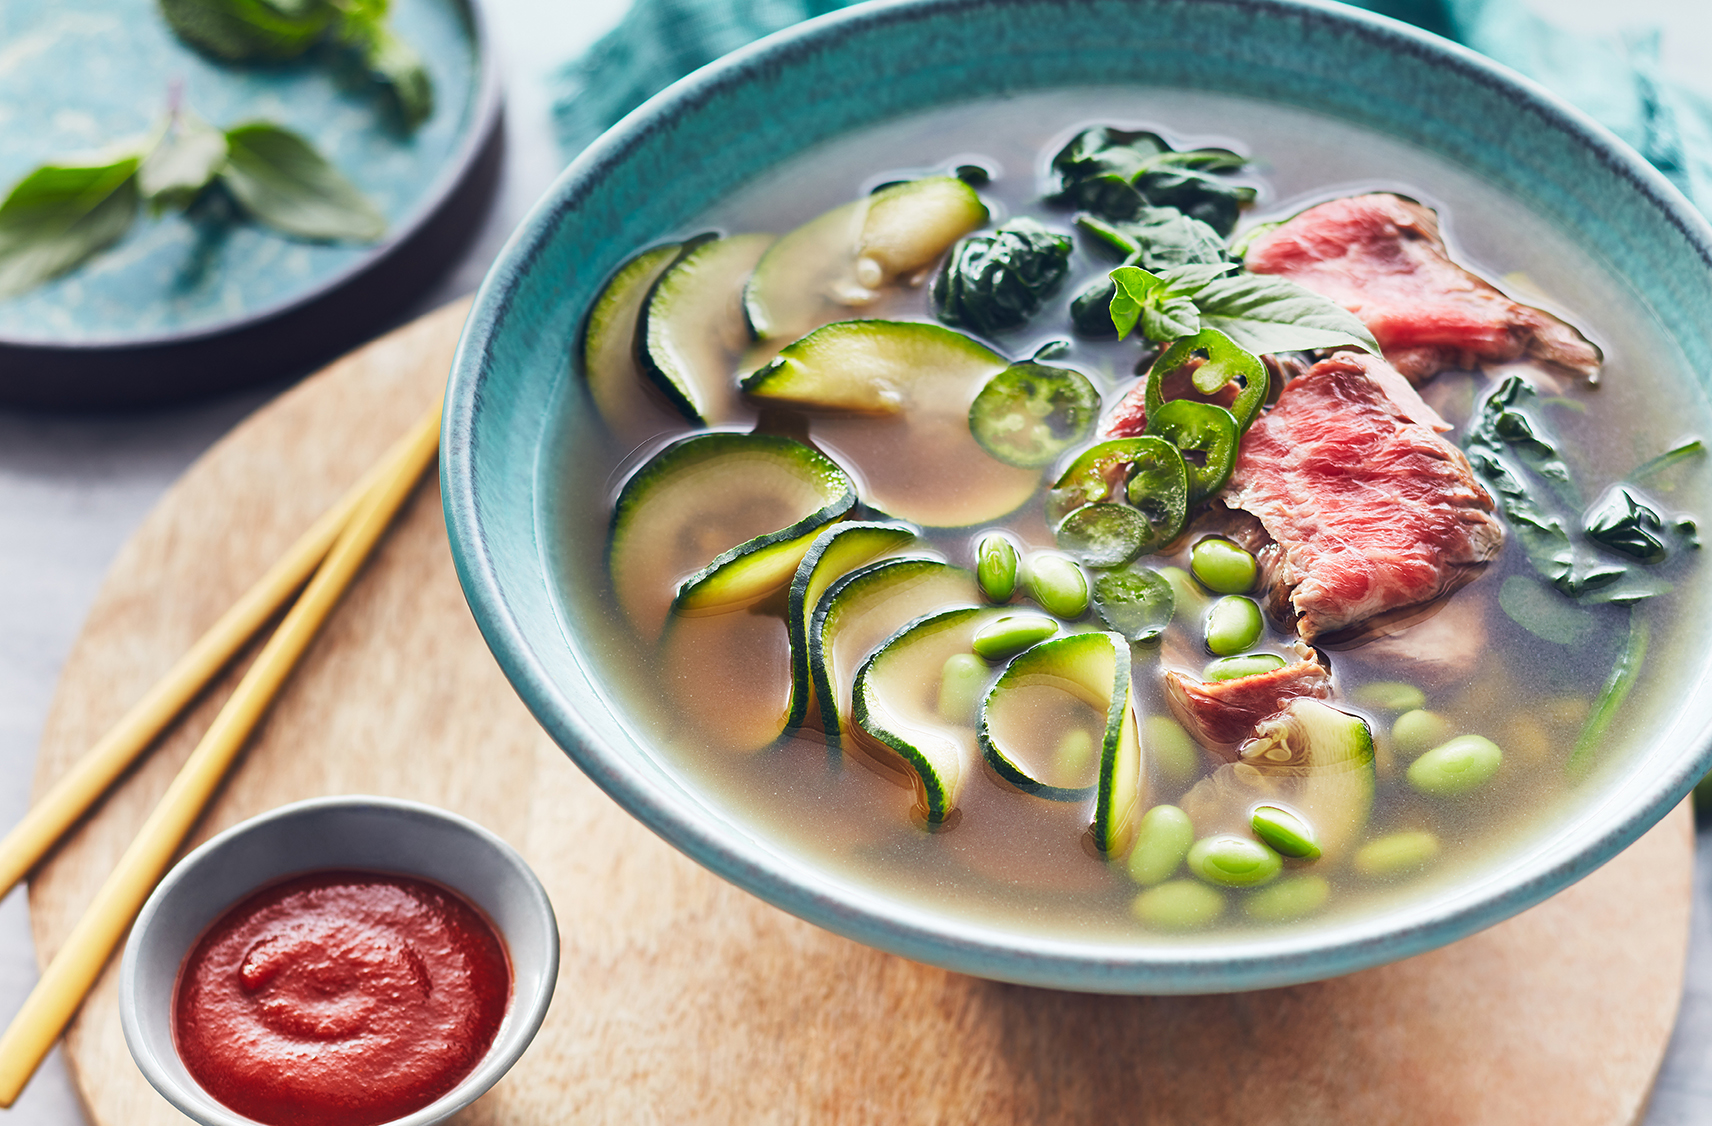 Chopsticks rest by a bowl of broth with zucchini noodles, red beef and veg
